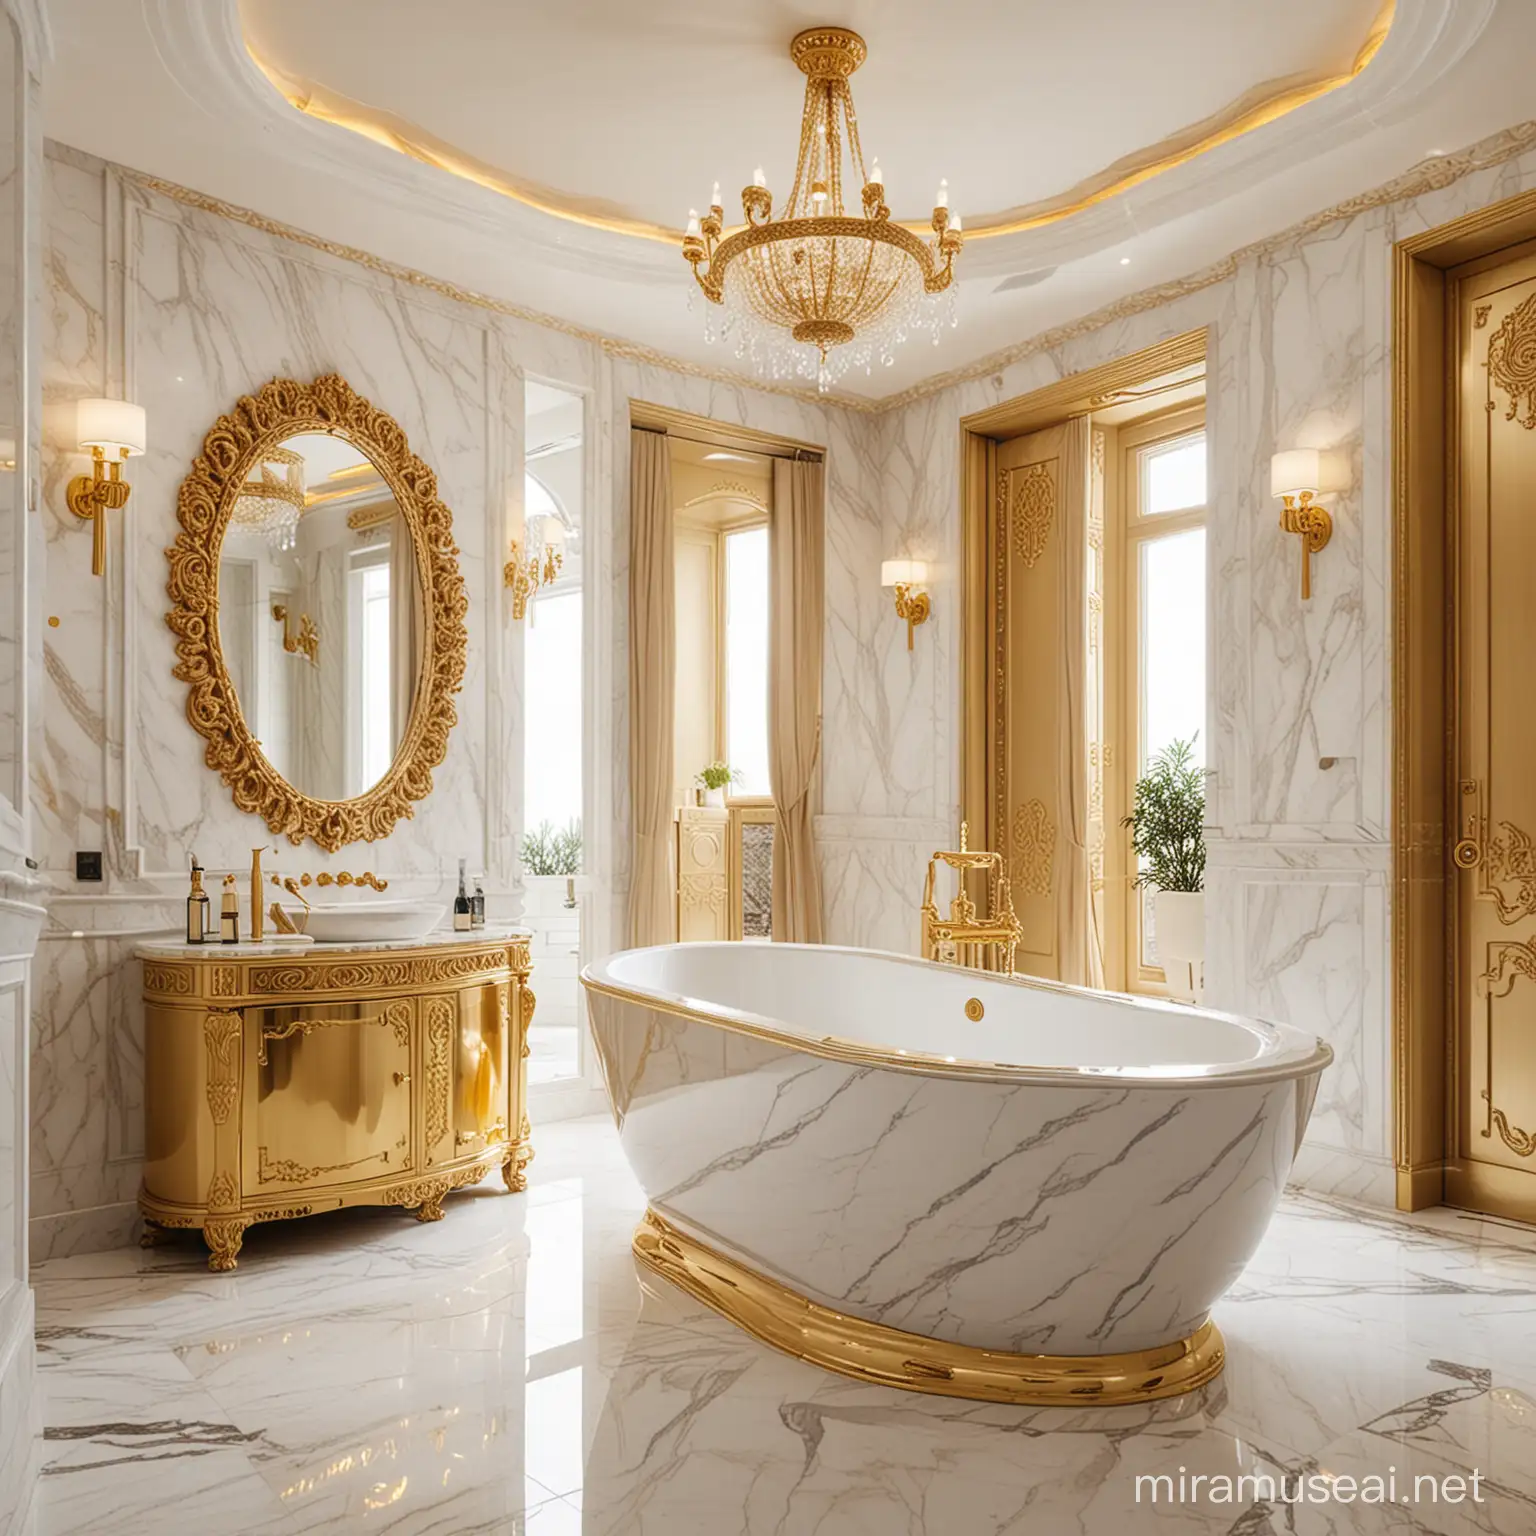 Beautiful Bathroom interior with exclusive marble. There is gold-plated bathtub. Dubai style. Very expensive